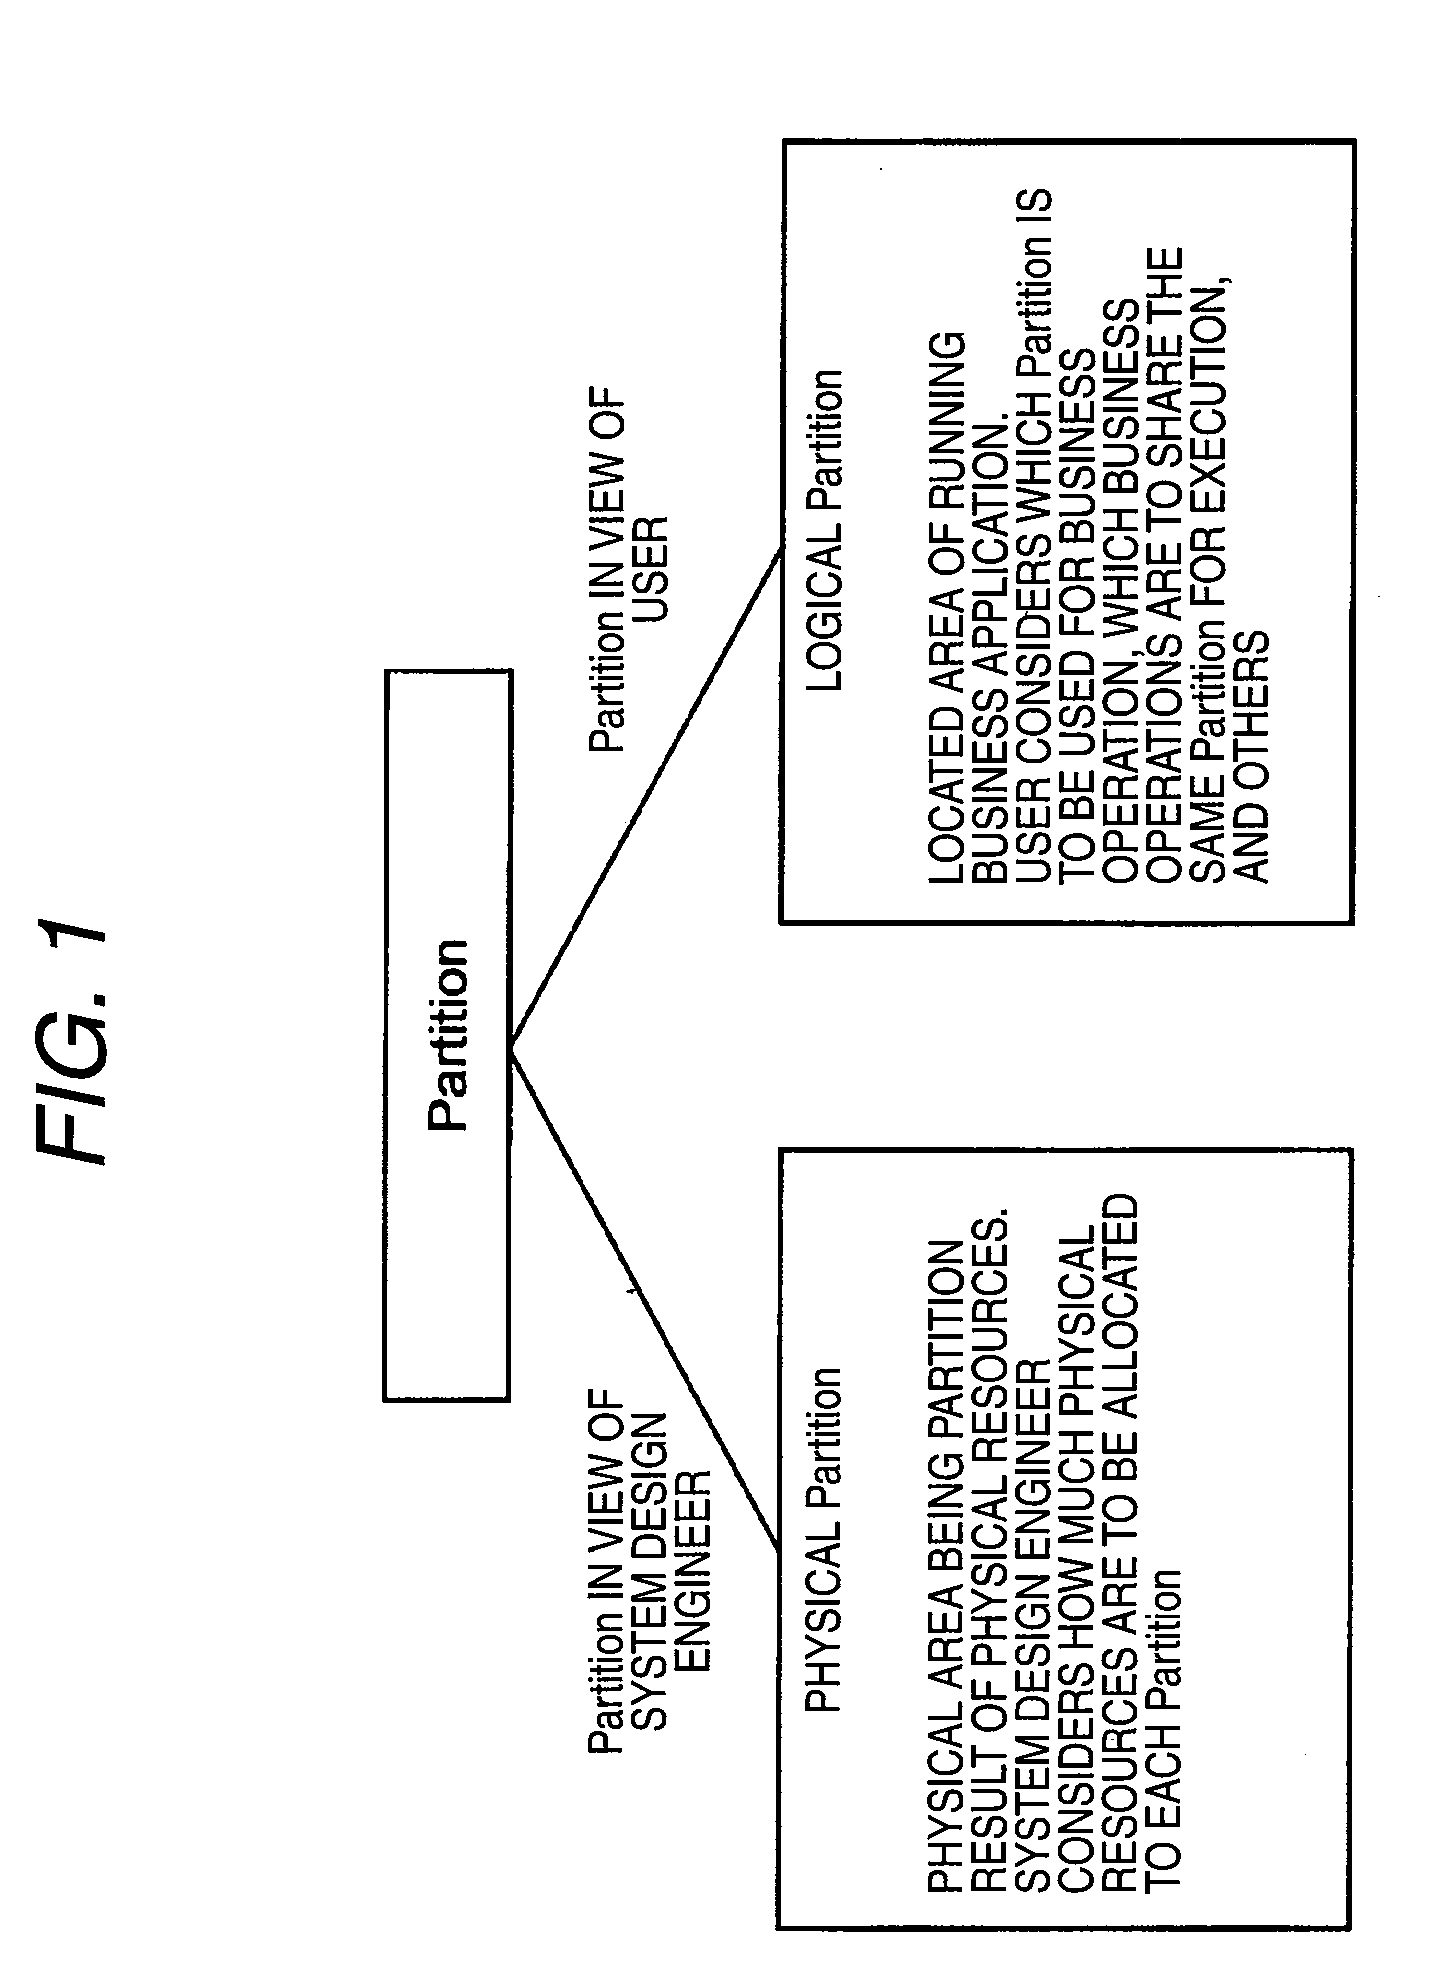 Application migration and power consumption optimization in partitioned computer system